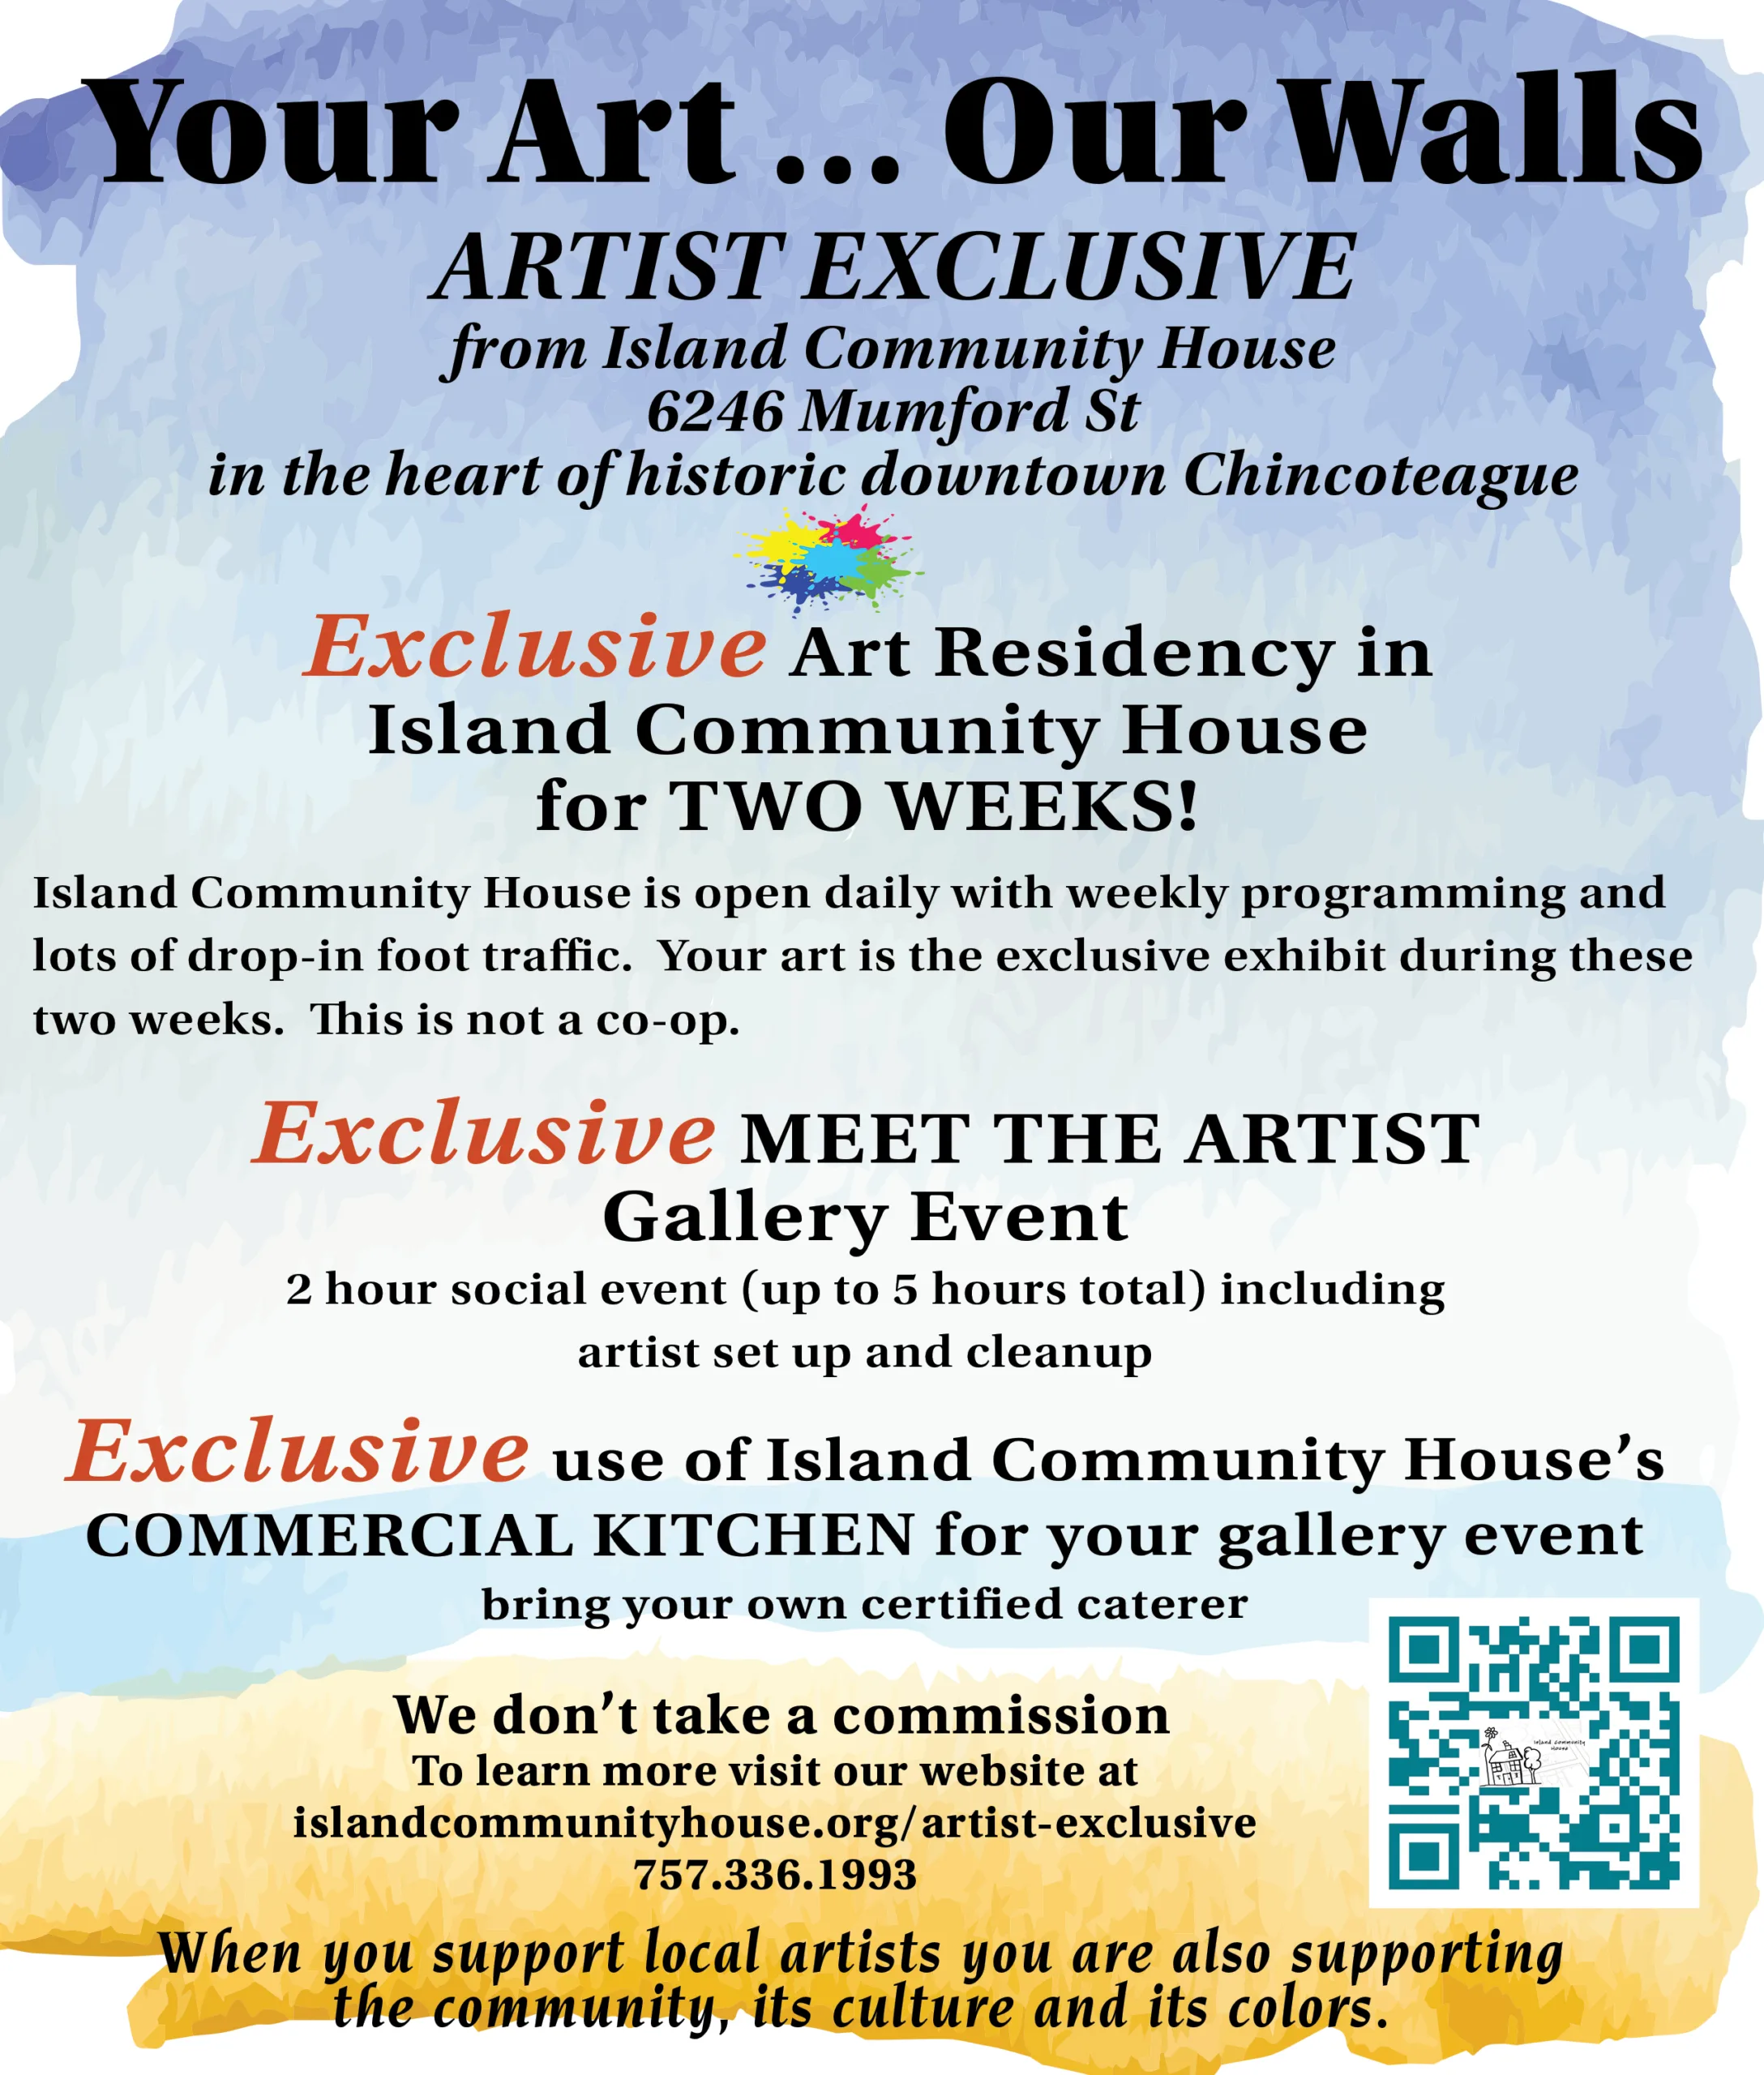 Your Art...Our Walls Artist Exclusive package at Island Community House